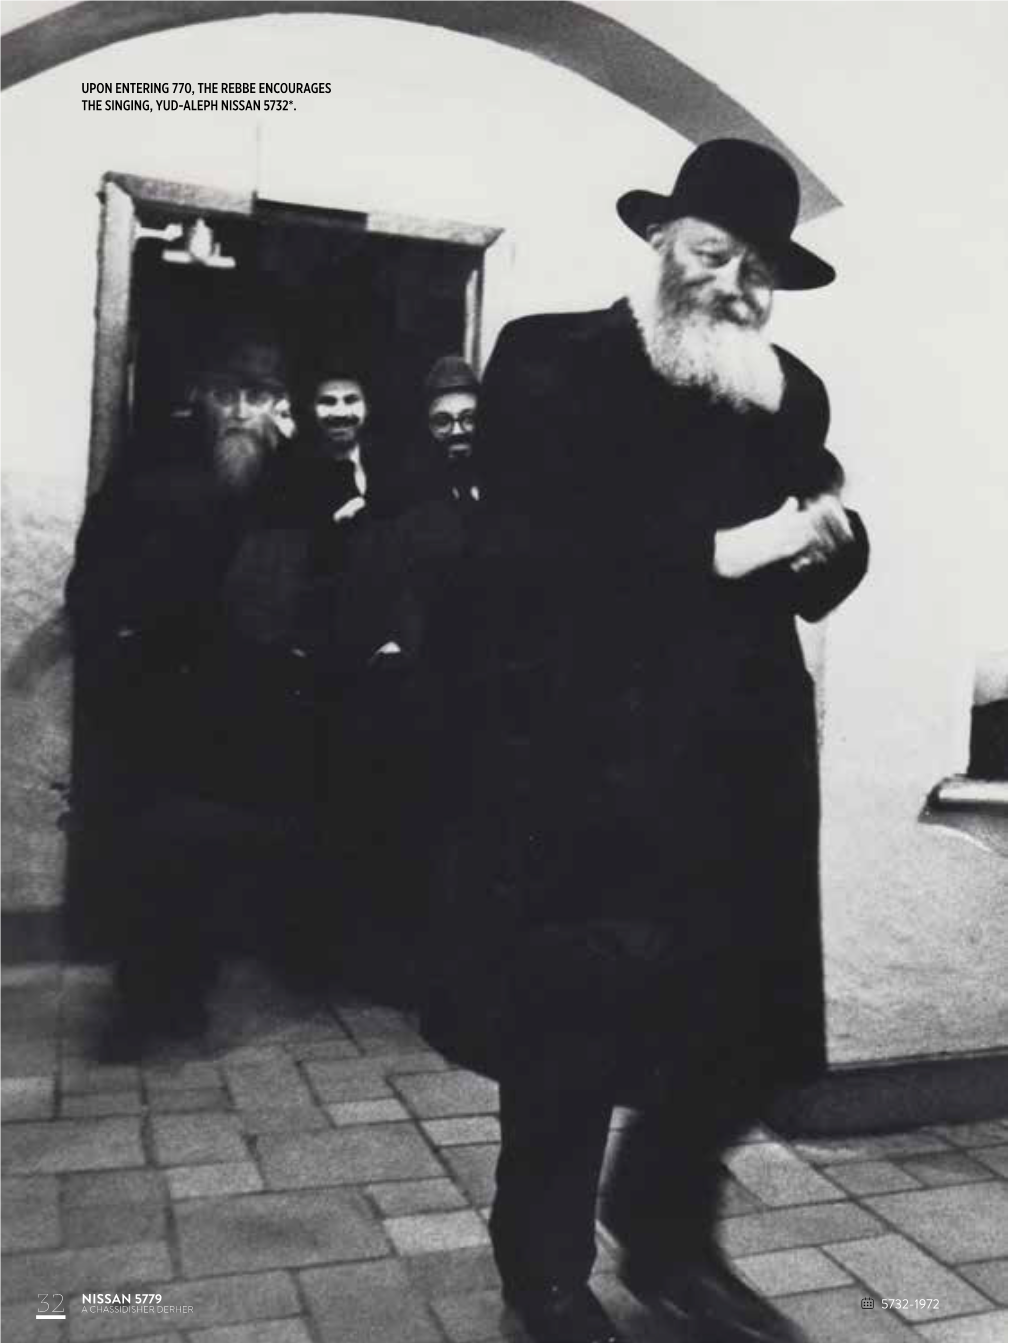 Upon Entering 770, the Rebbe Encourages the Singing, Yud-Aleph Nissan 5732*